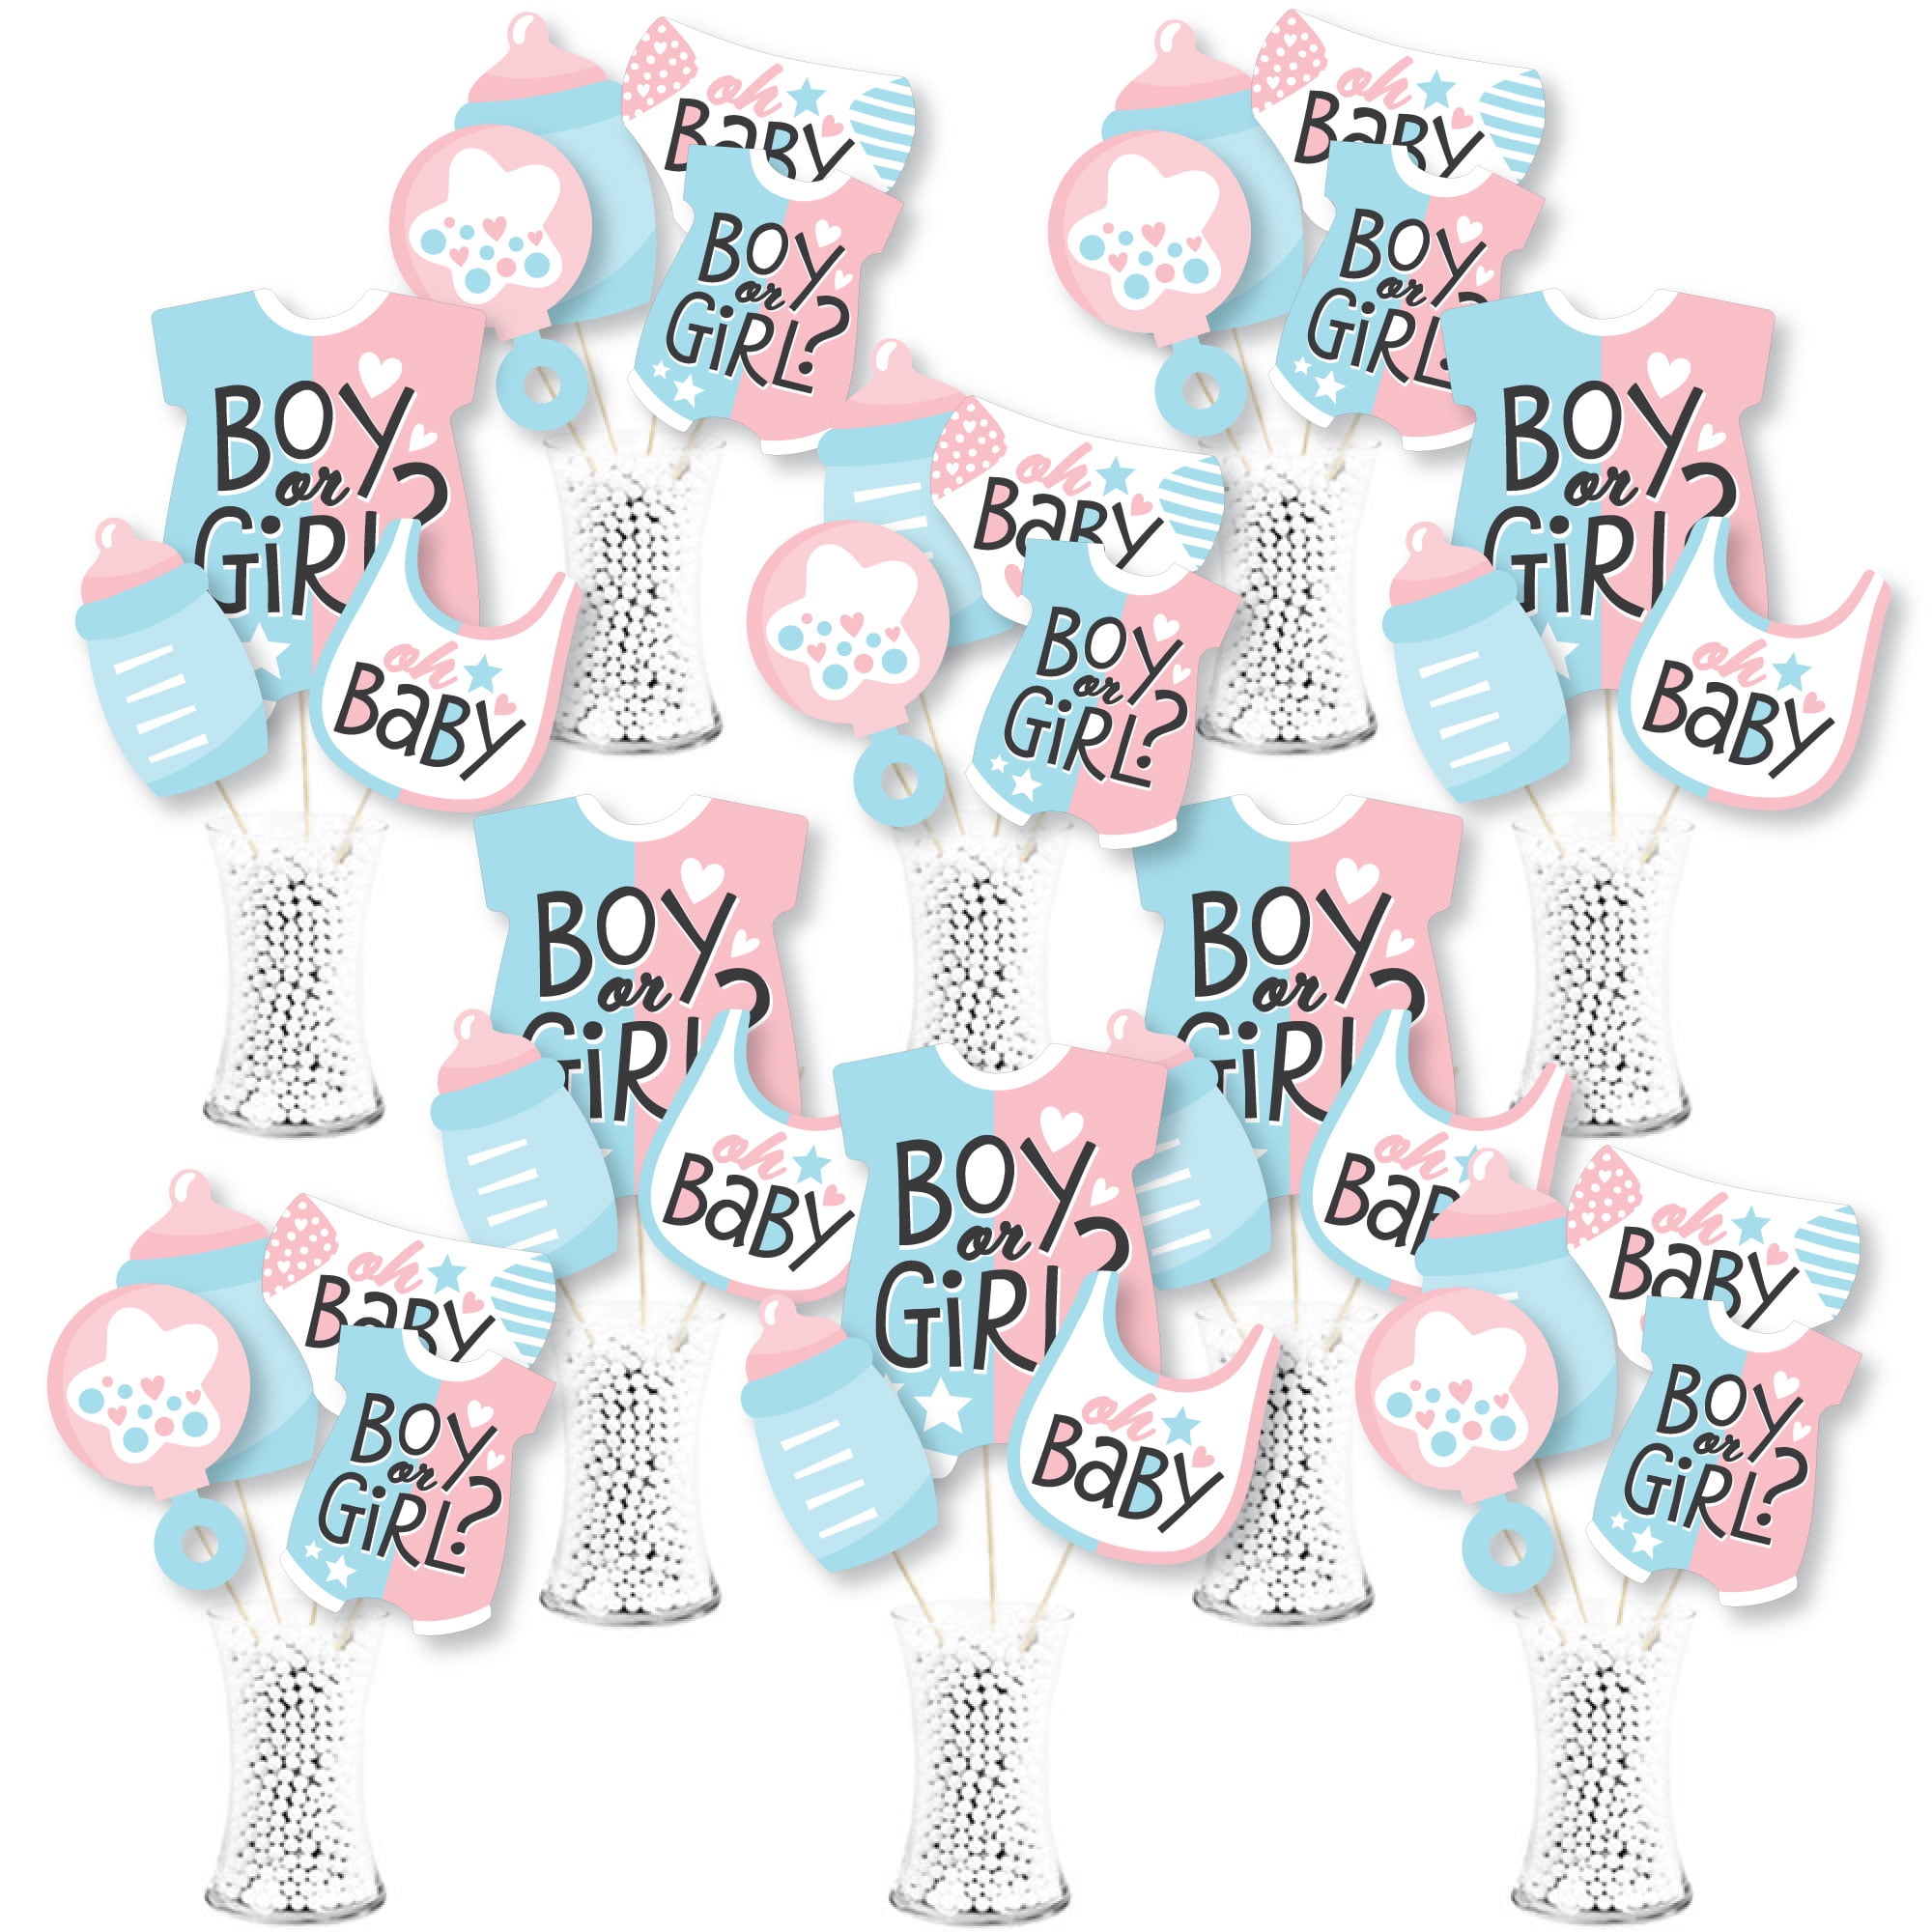 Gender Reveal Party Supplies 105 Pieces Baby Gender Reveal